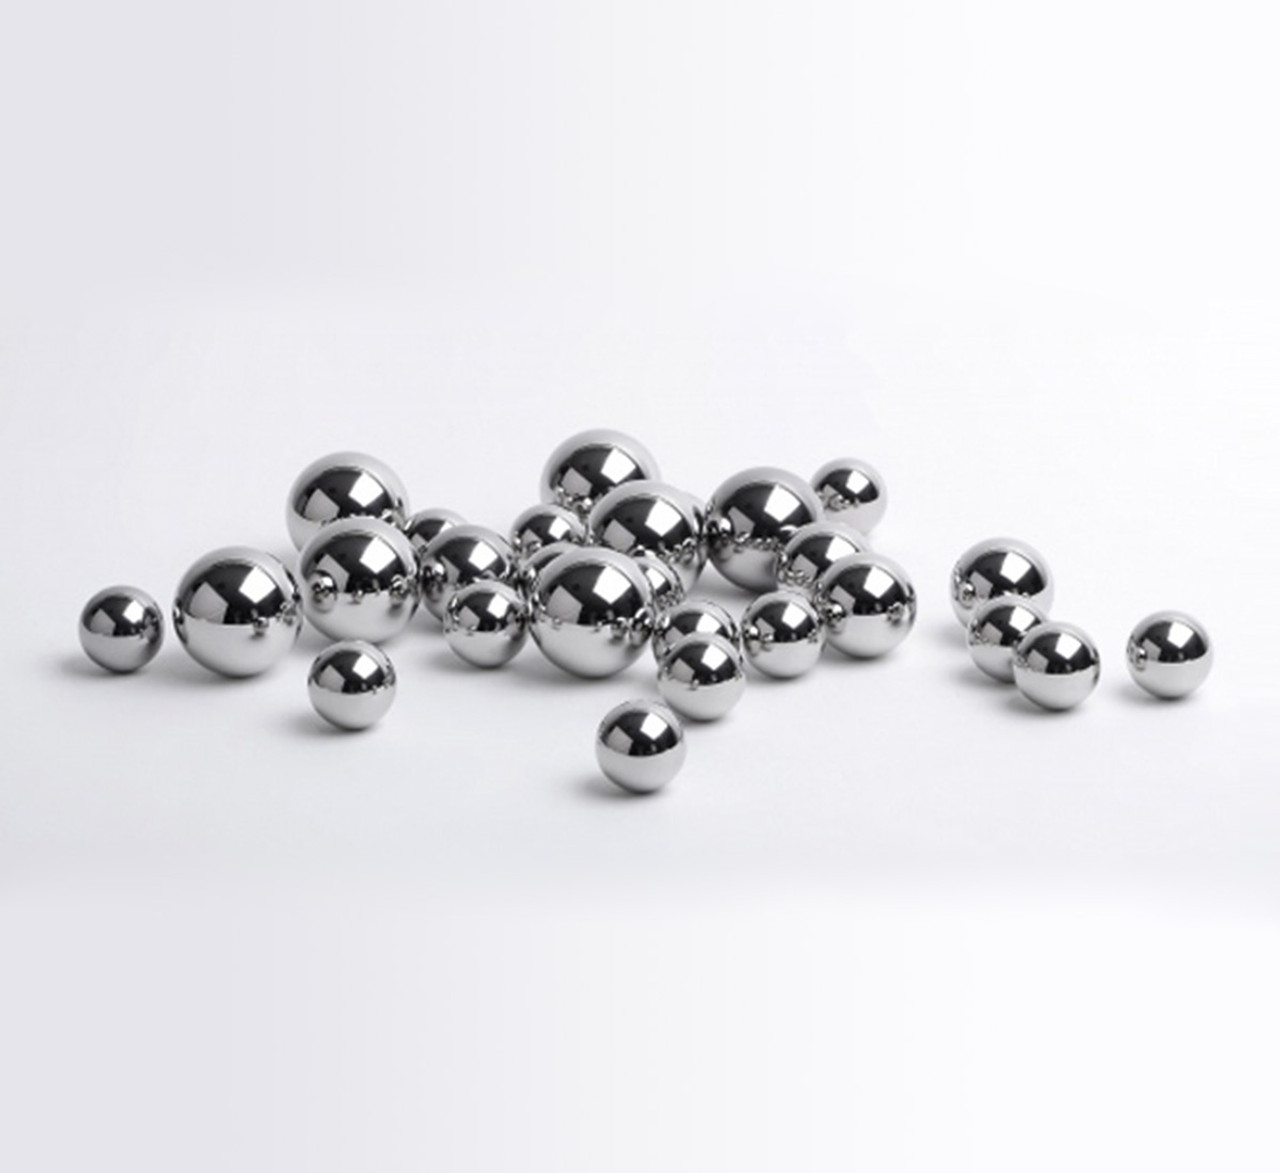 Rolling elements Ball 7.144 mm INOX AISI 420 - 1